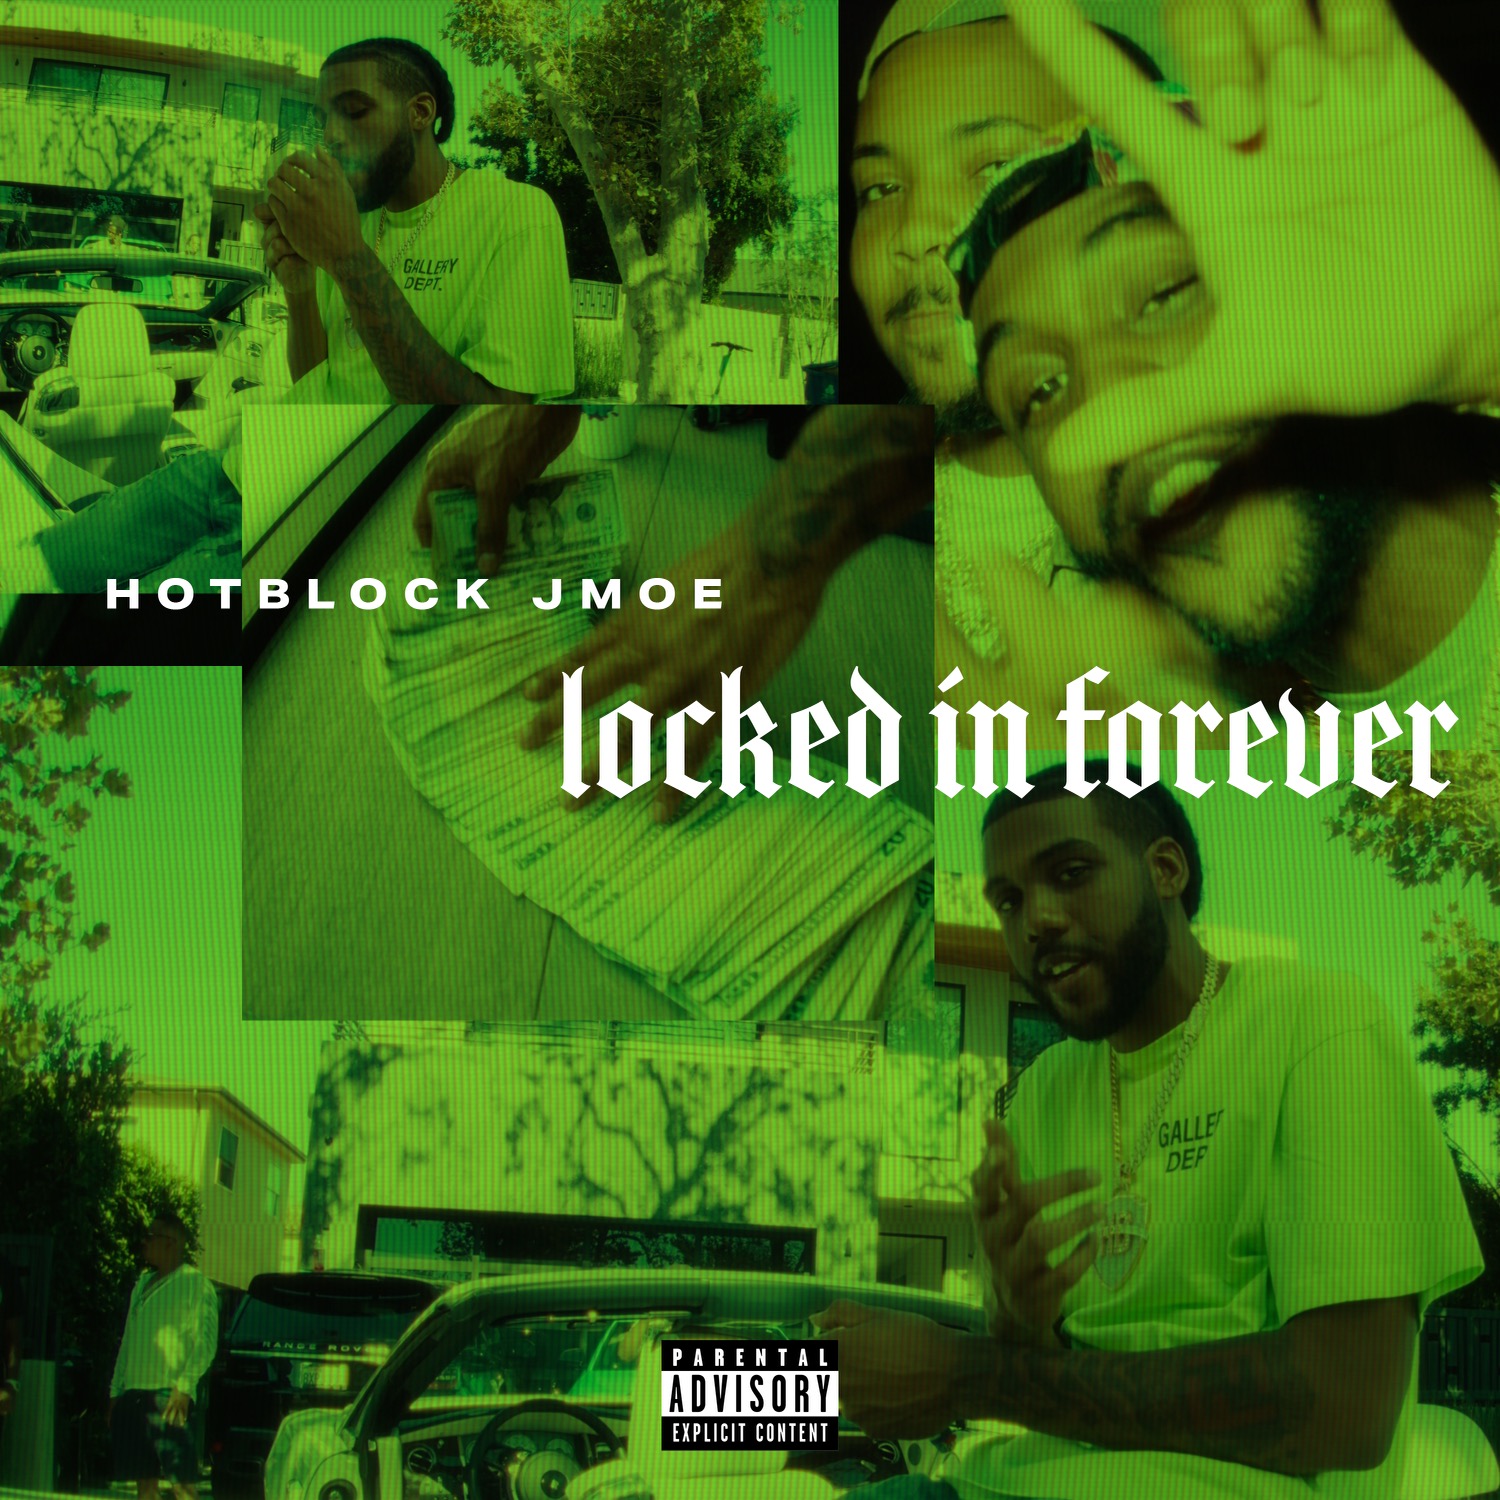 Hotblock Jmoe Is “LOCKED IN FOREVER” On His Newest Track